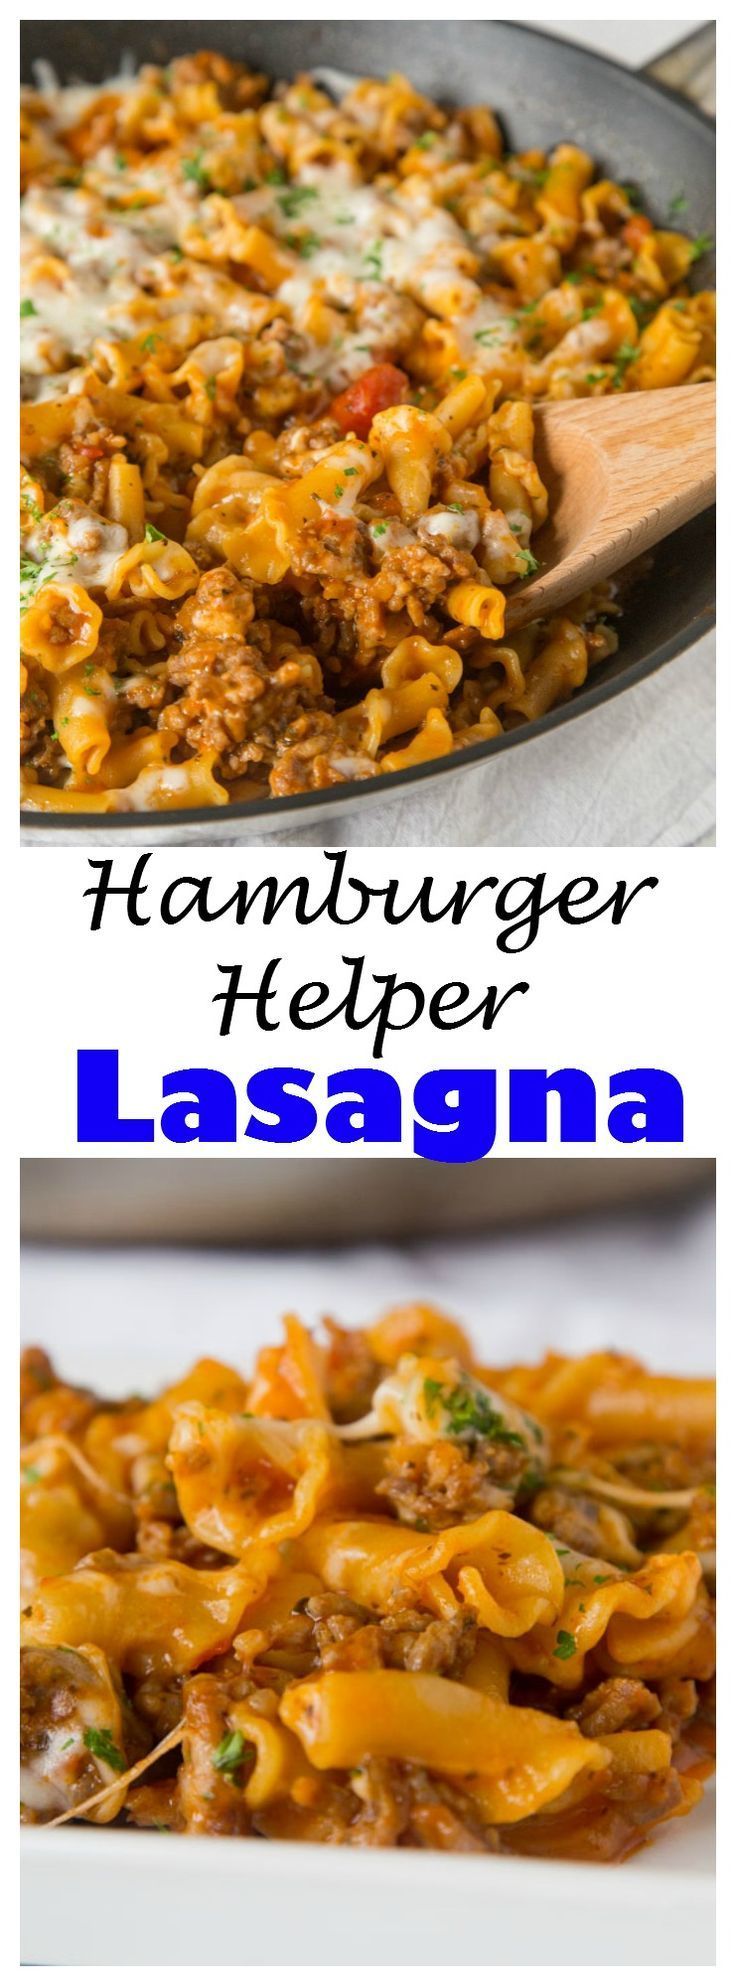 HOMEMADE HAMBURGER HELPER LASAGNA – SKIP THE BOX AND TRY THIS HOMEMADE VERSION. JUST A FEW INGREDIENTS, READY IN MINUTES, AND THE WHOLE FAMILY WILL LOVE IT! -   17 homemade hamburger recipes
 ideas